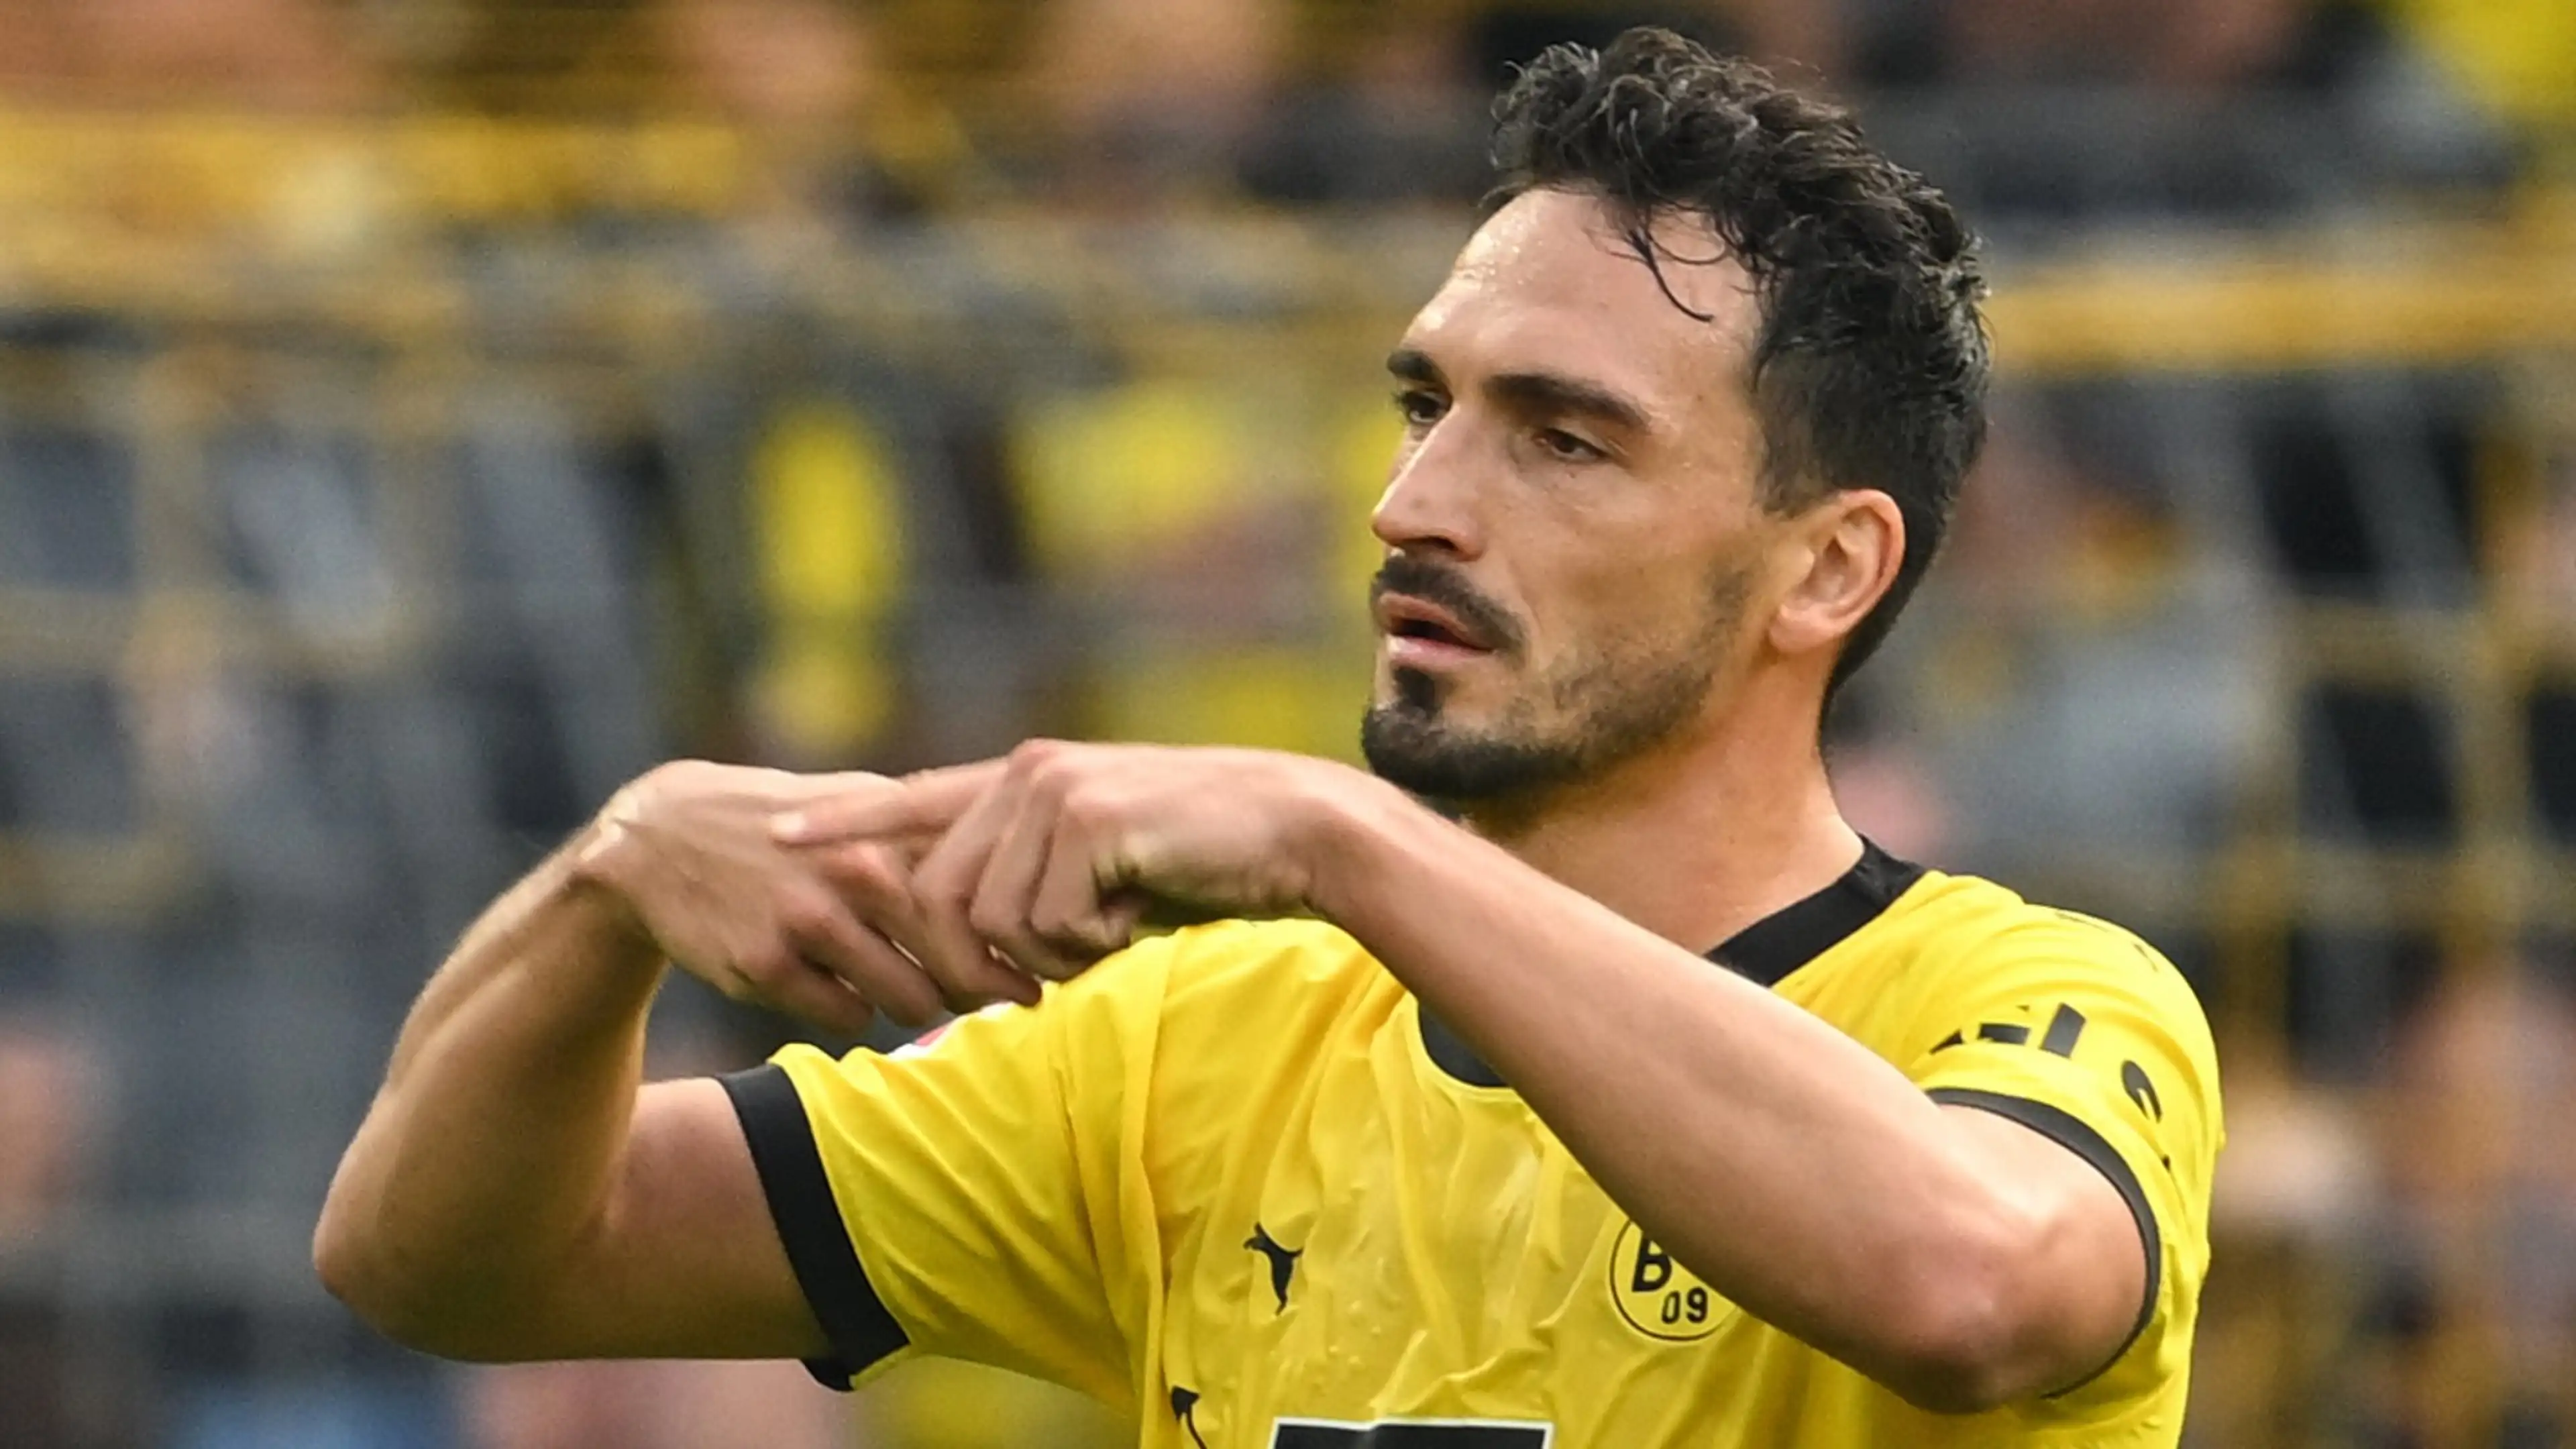 19-mind-blowing-facts-about-mats-hummels